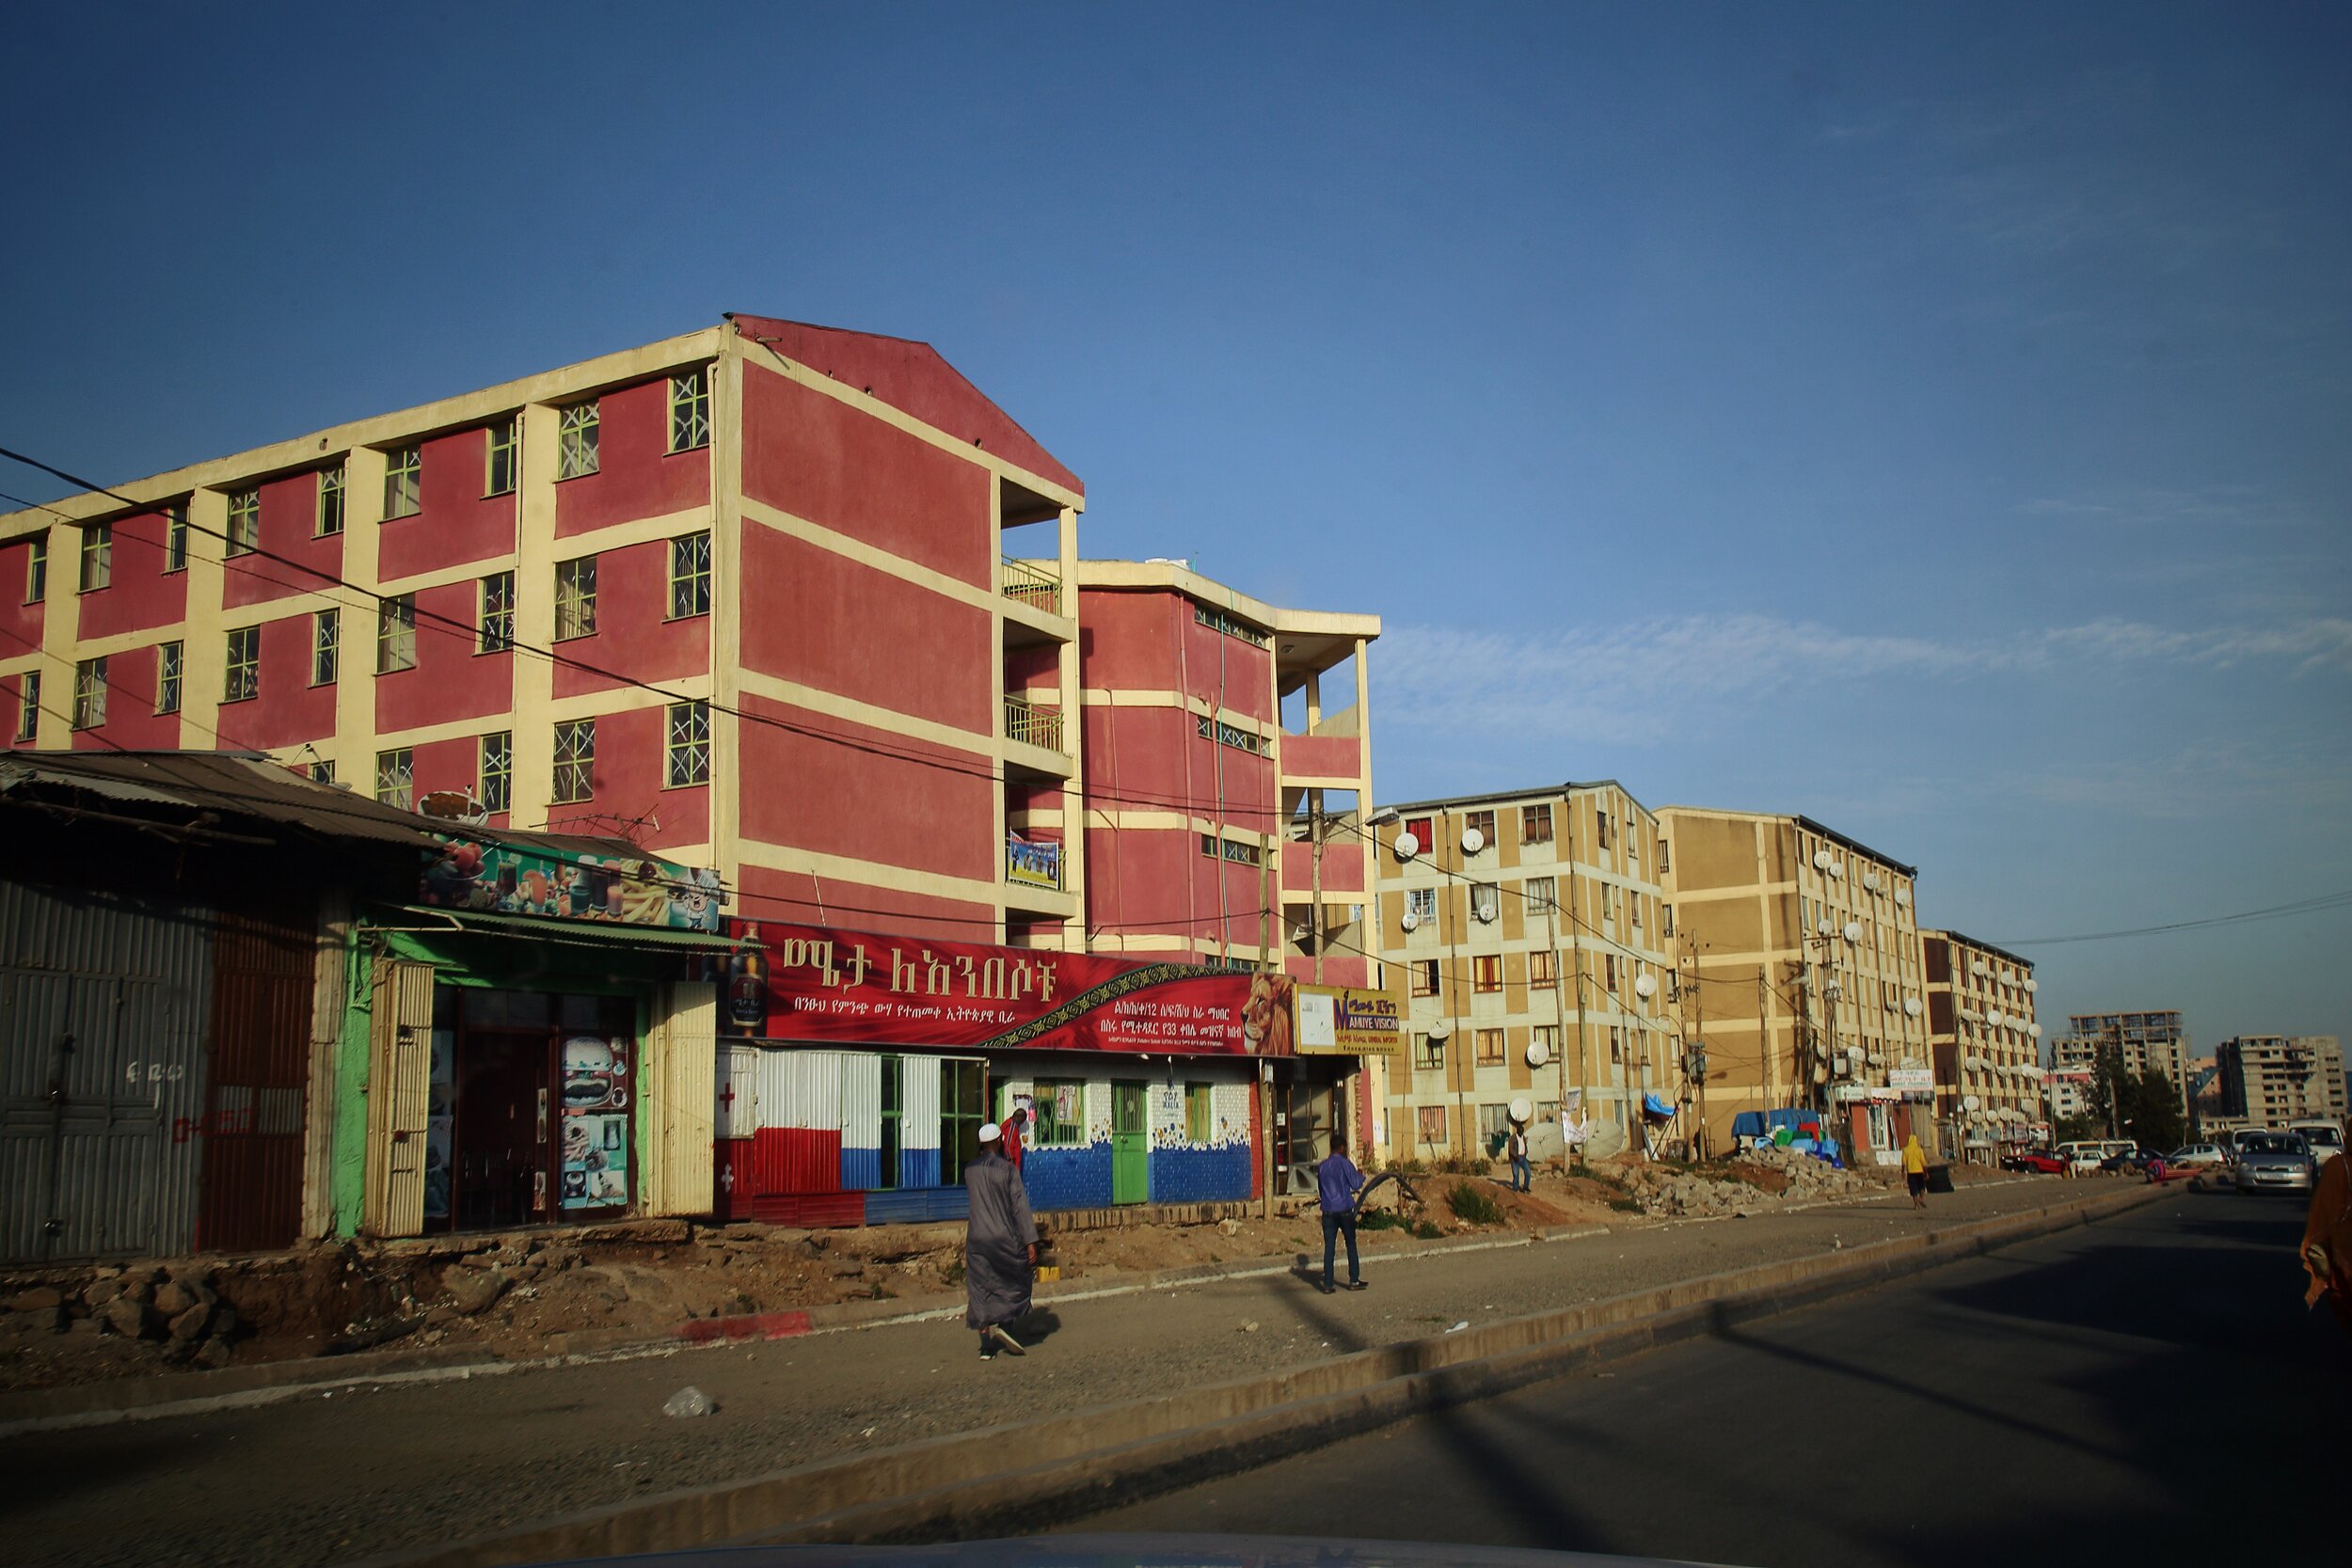  Since 2005, Ethiopia has run one of the biggest public housing programs in the world. 146,000 condominium units have already been handed over with an additional 165,000 currently under construction. Most of them have four floors; communal buildings 